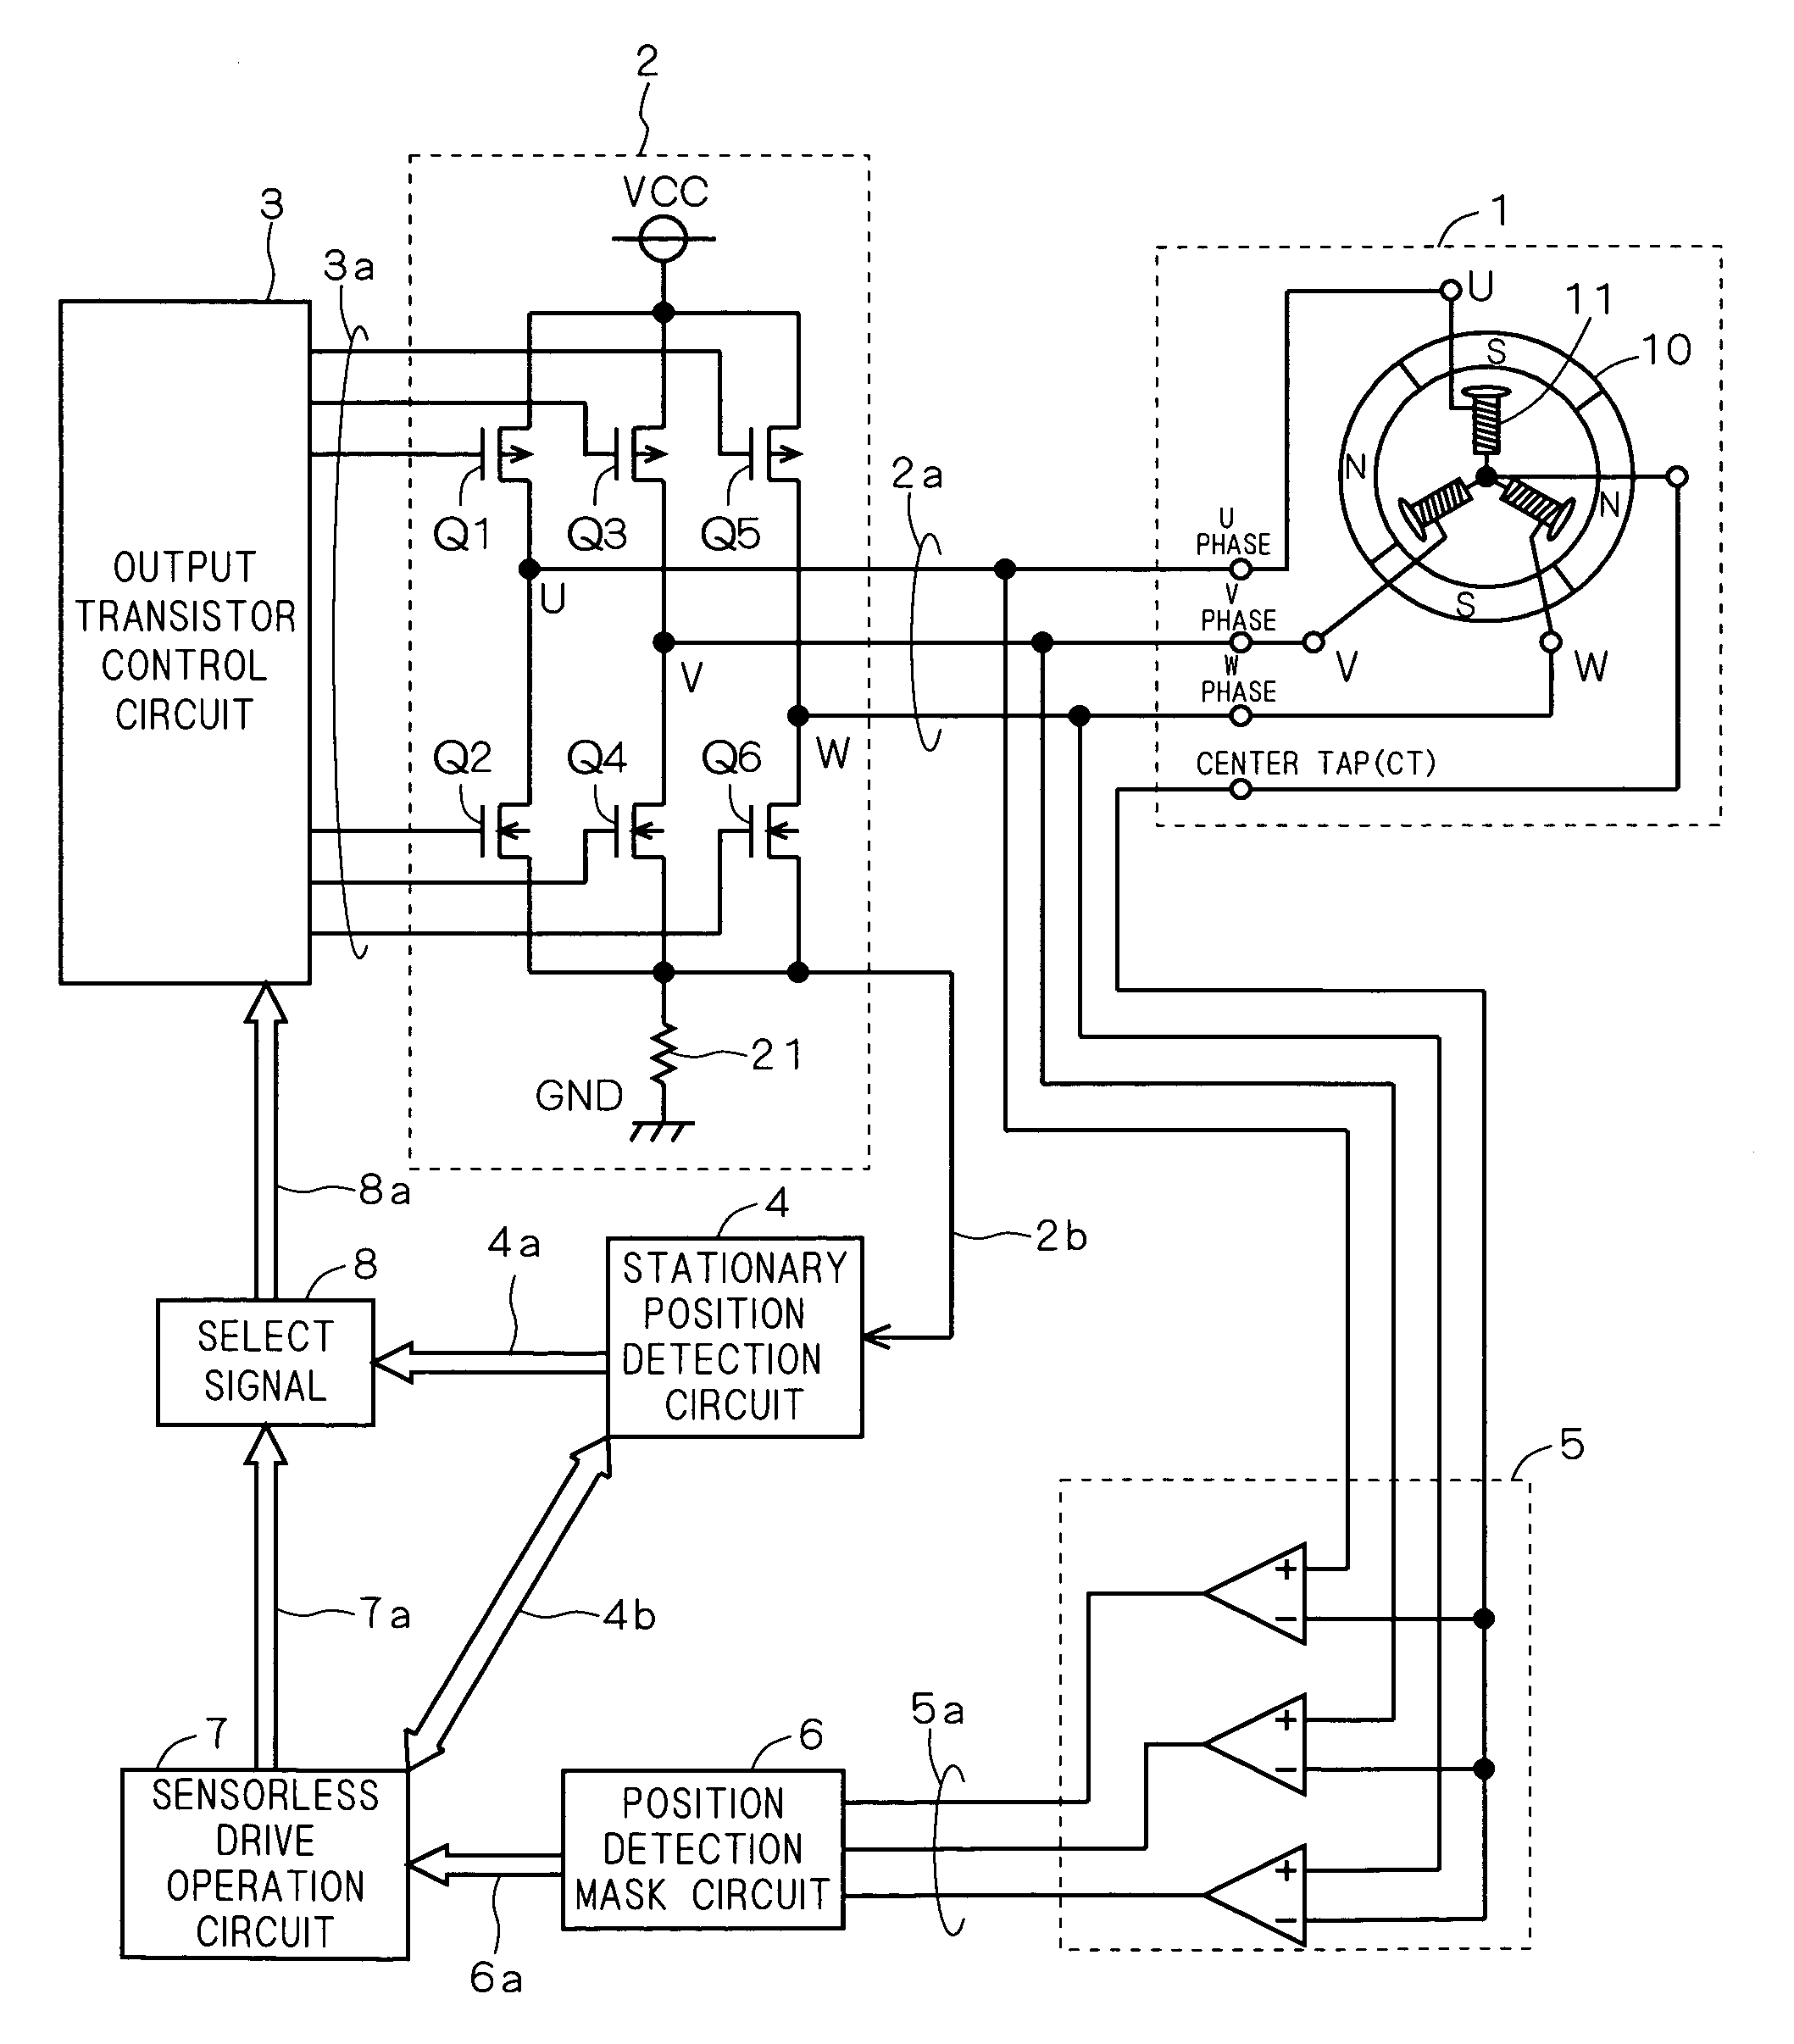 Stationary position detection circuit and motor drive circuit